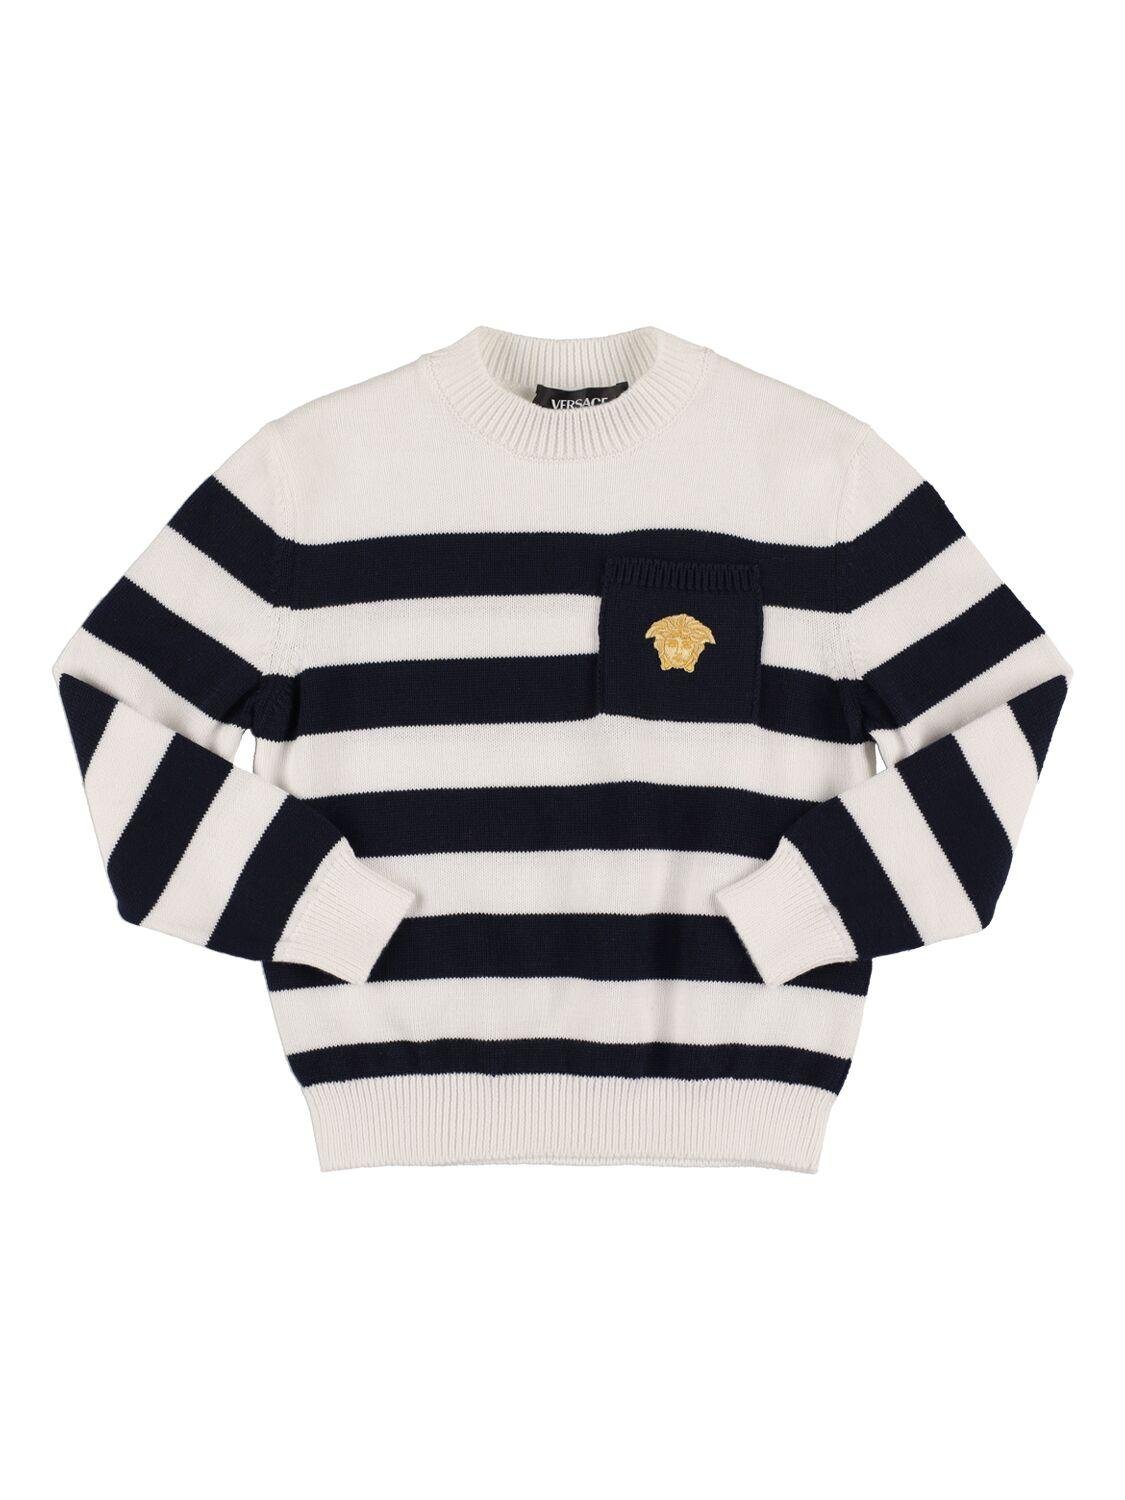 Printed Marine Knit Sweater by VERSACE